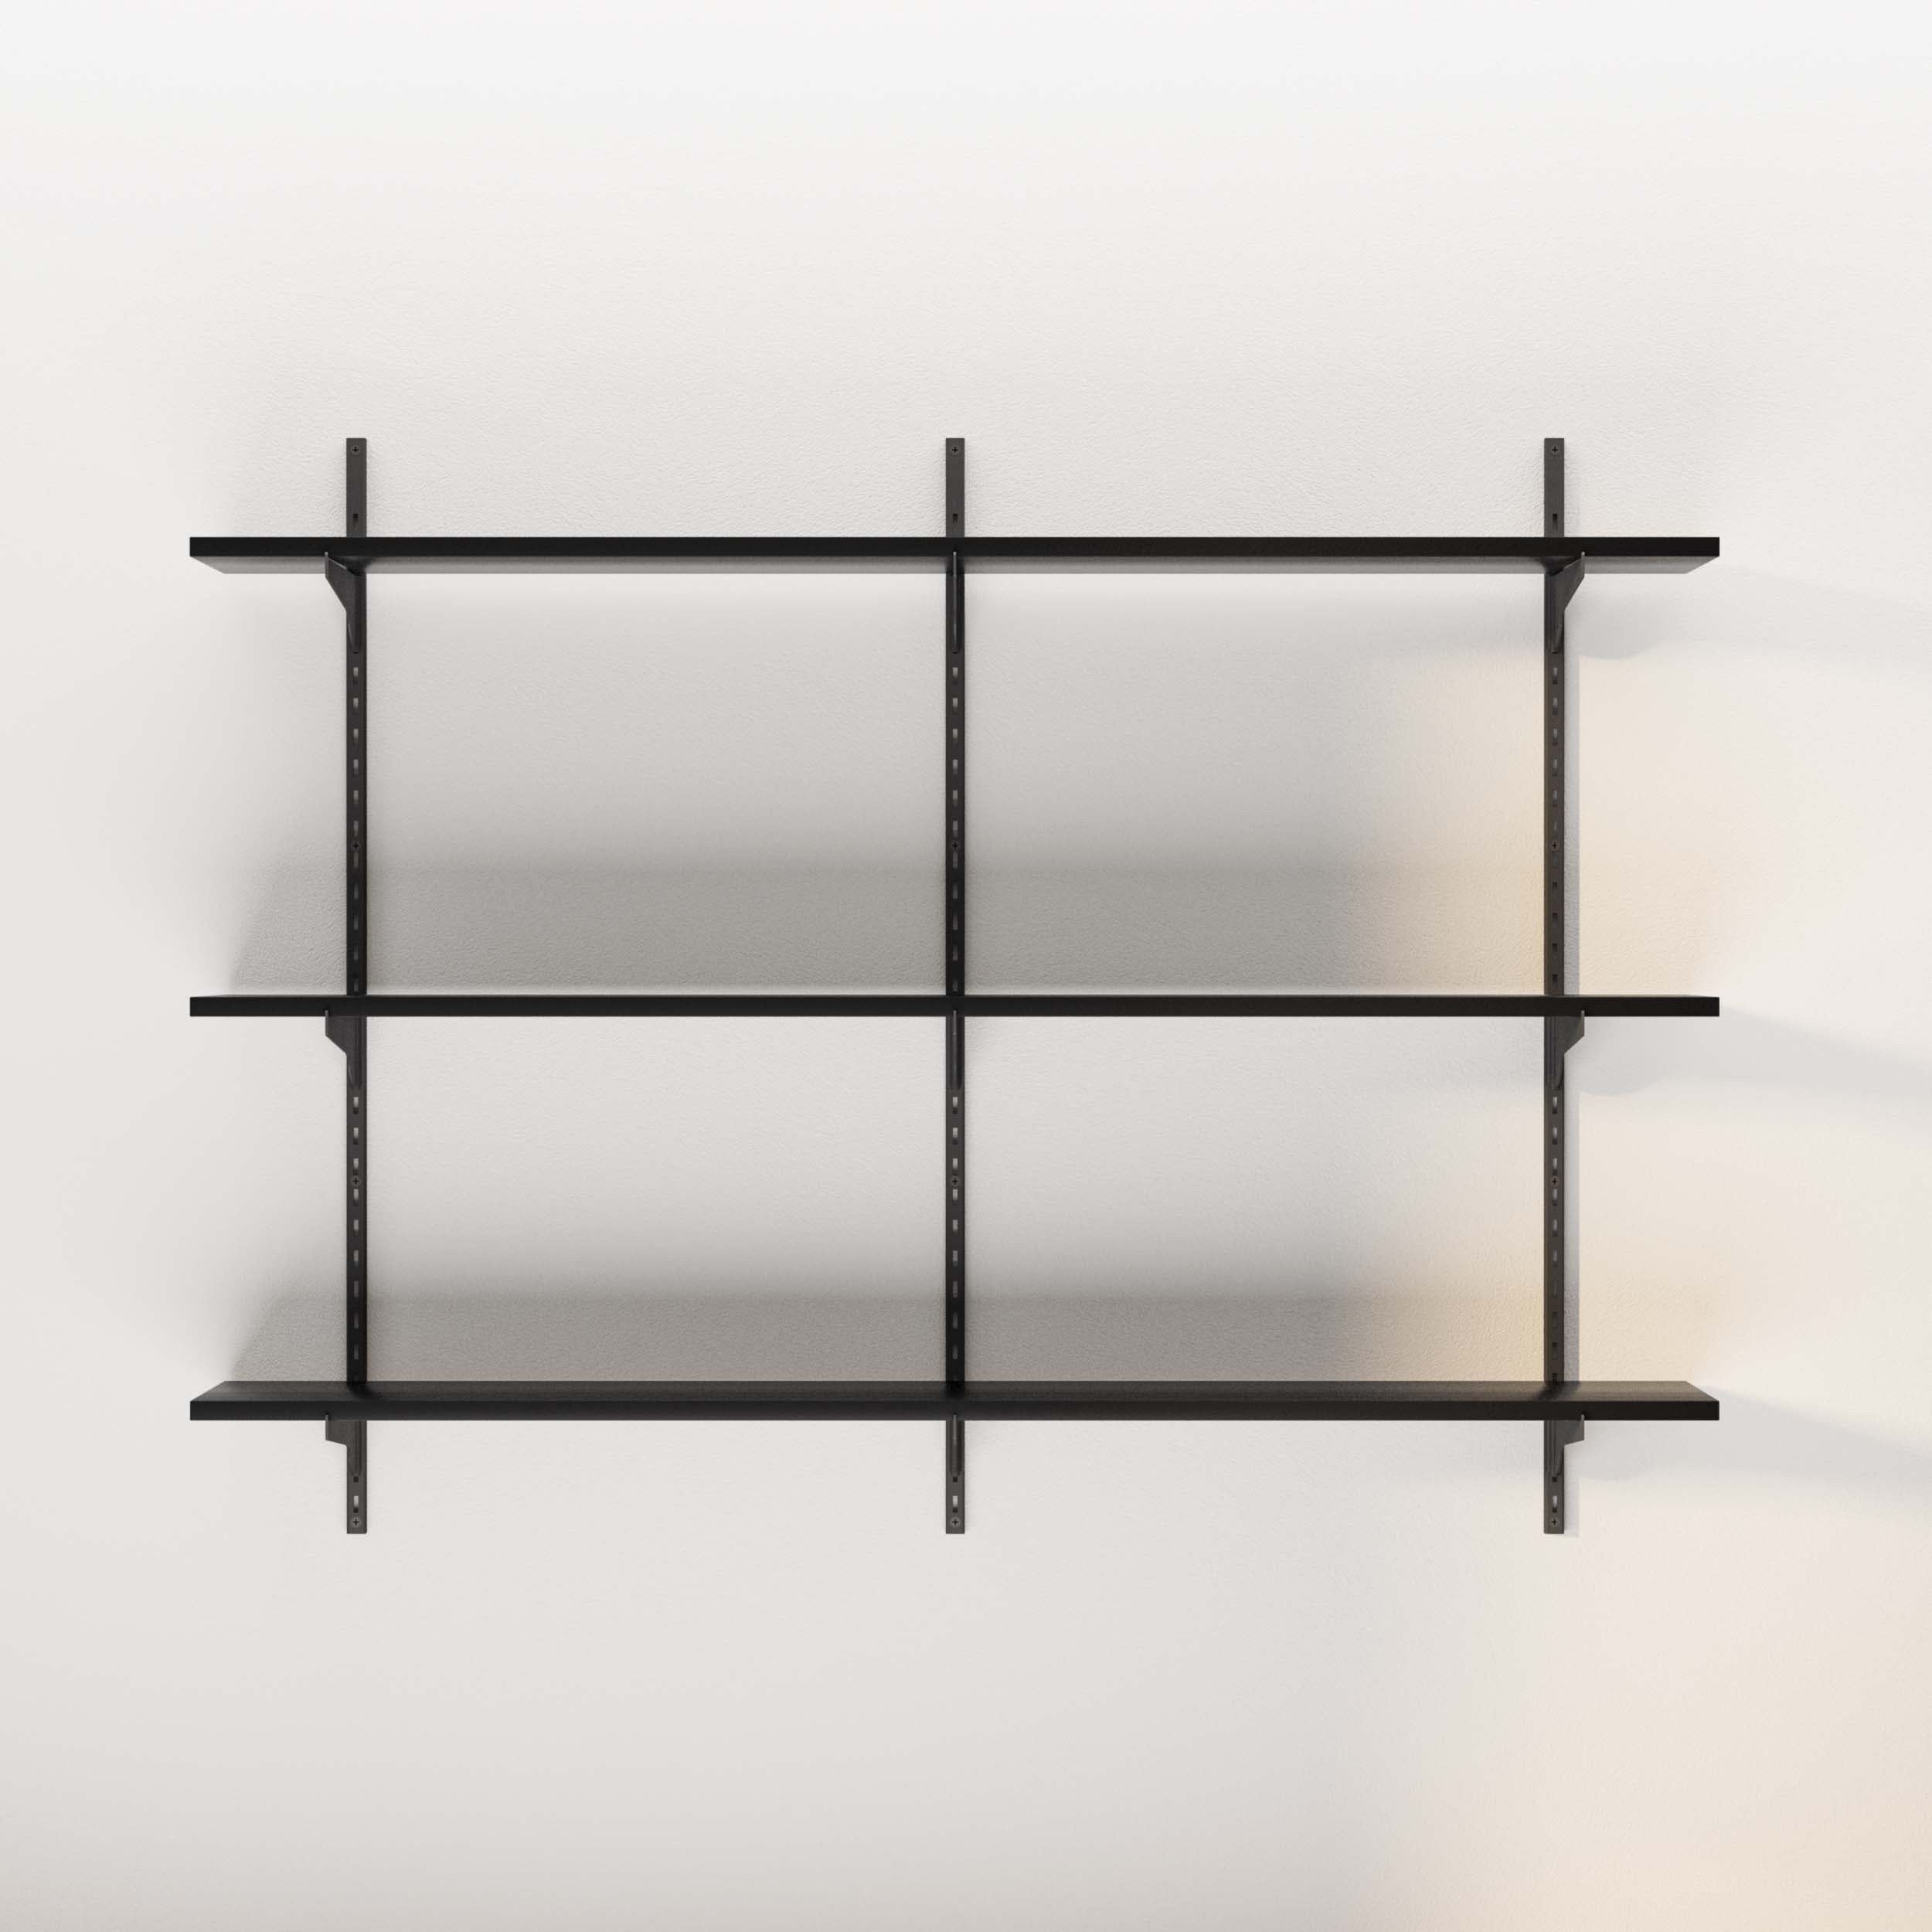 Empty black shelves against a white wall, modern and minimalistic design.